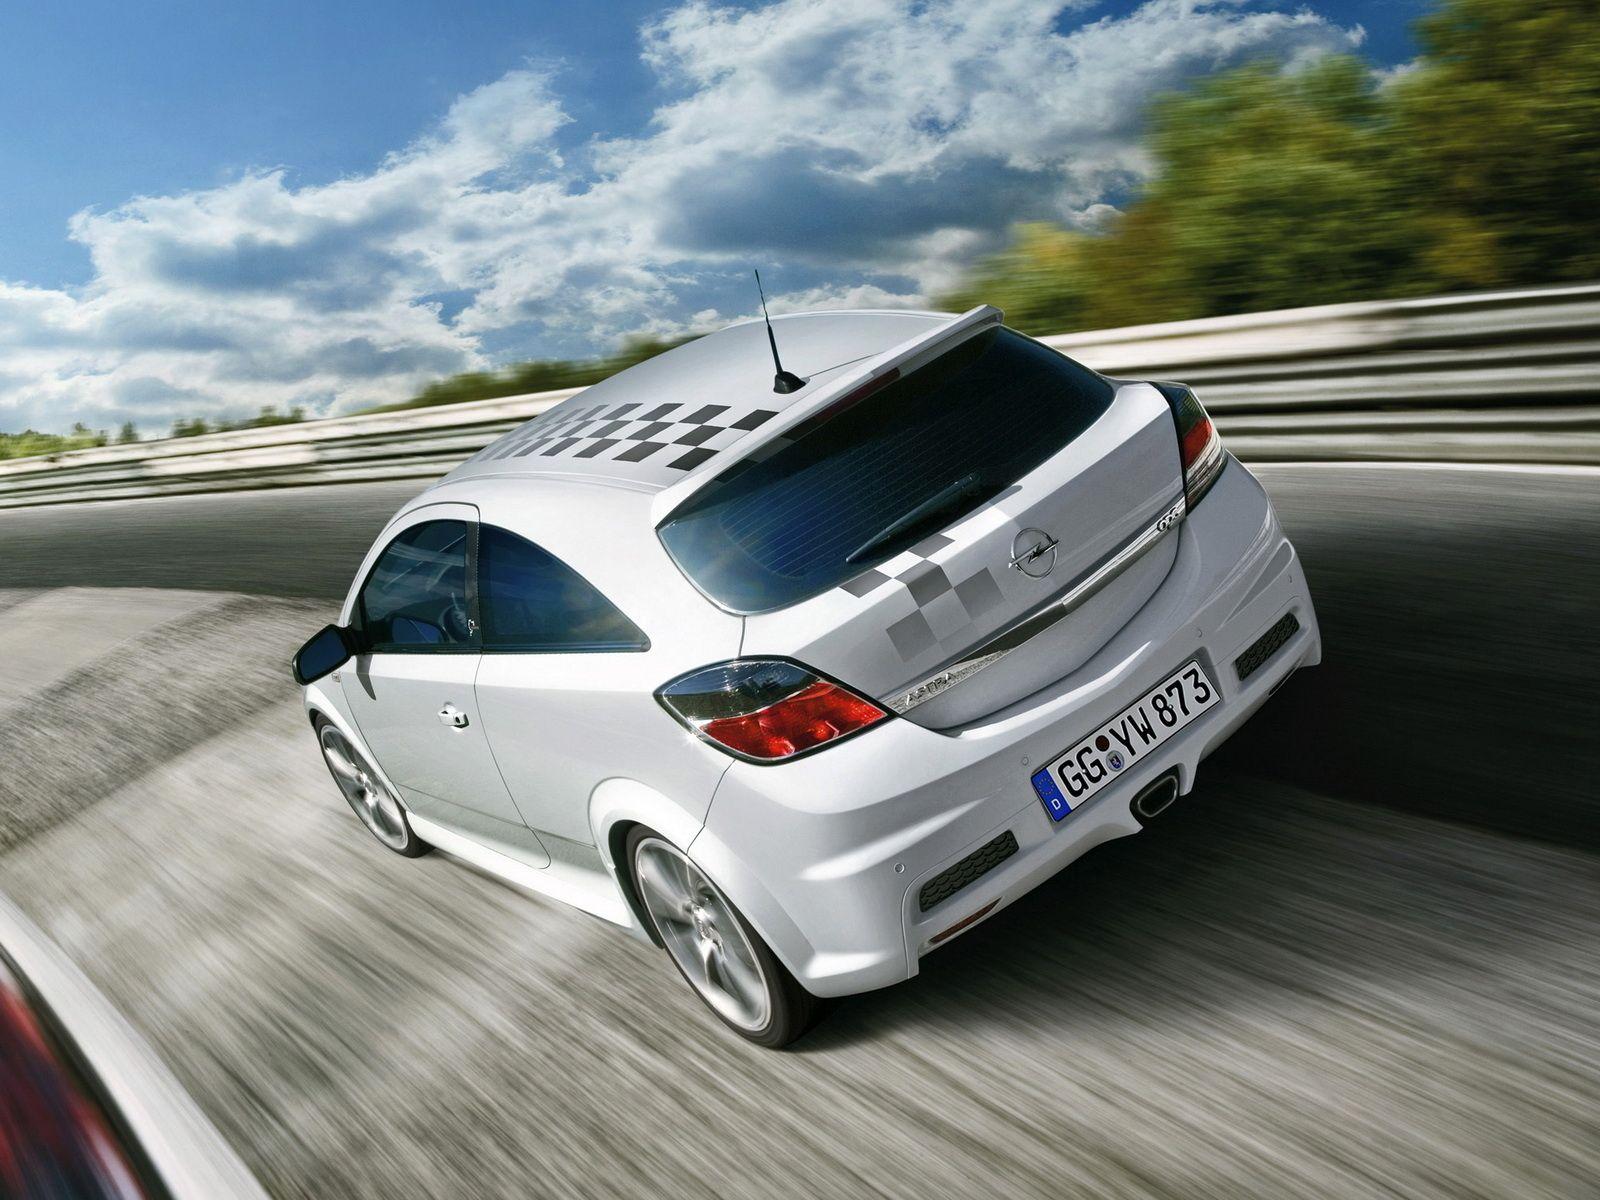 Opel Astra GTC wallpaper and image, picture, photo